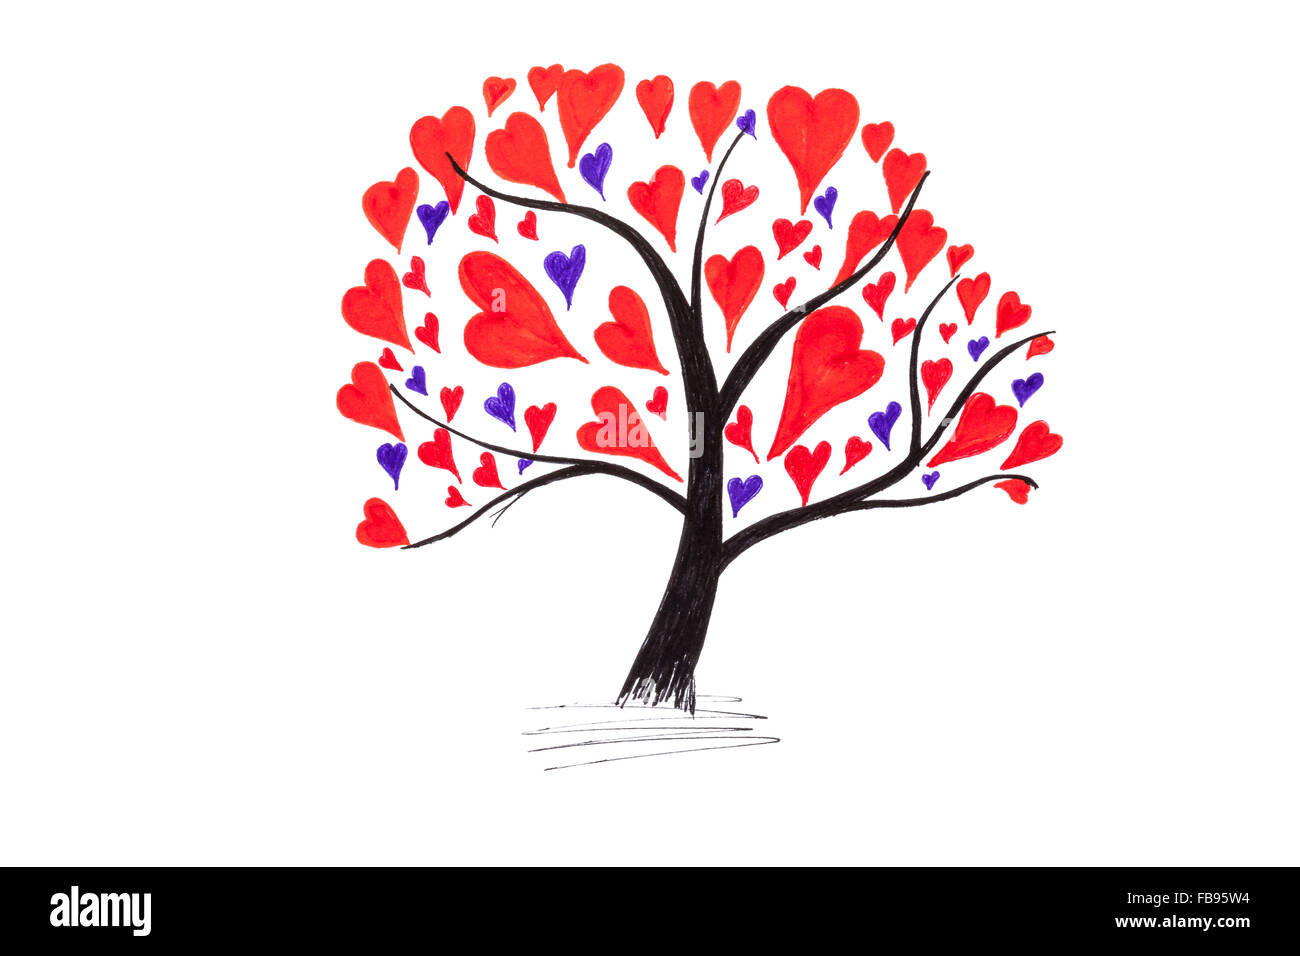 Handmade Valentine card with ink drawing of tree with hearts Stock Photo